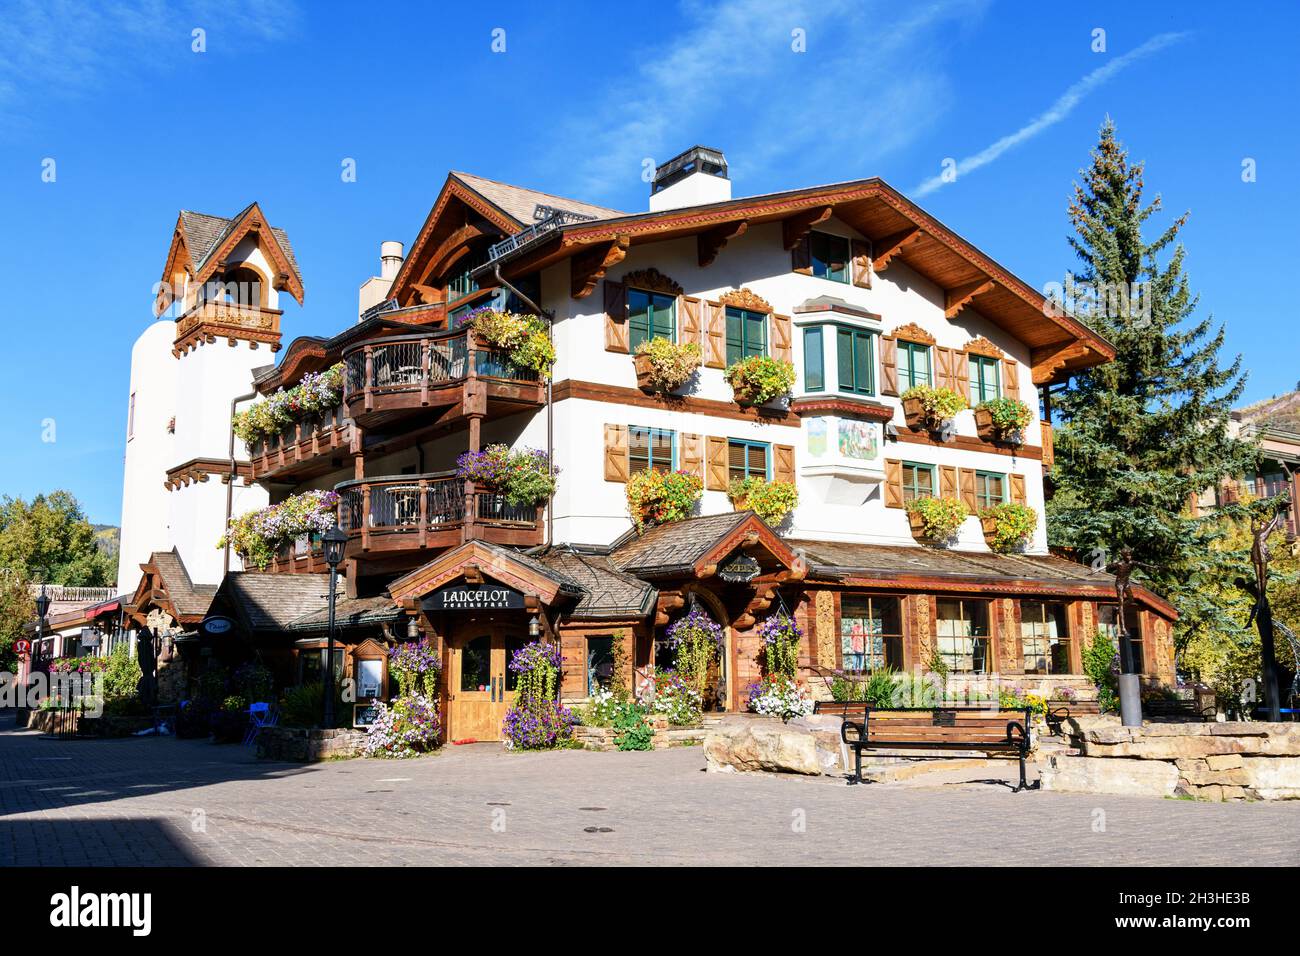 Beautiful bavarian style Bell Tower Residences building on Gore Creek Drive, hosting famous Lancelot Restaurant and Axels Clothing- Vail, Colorado, US Stock Photo